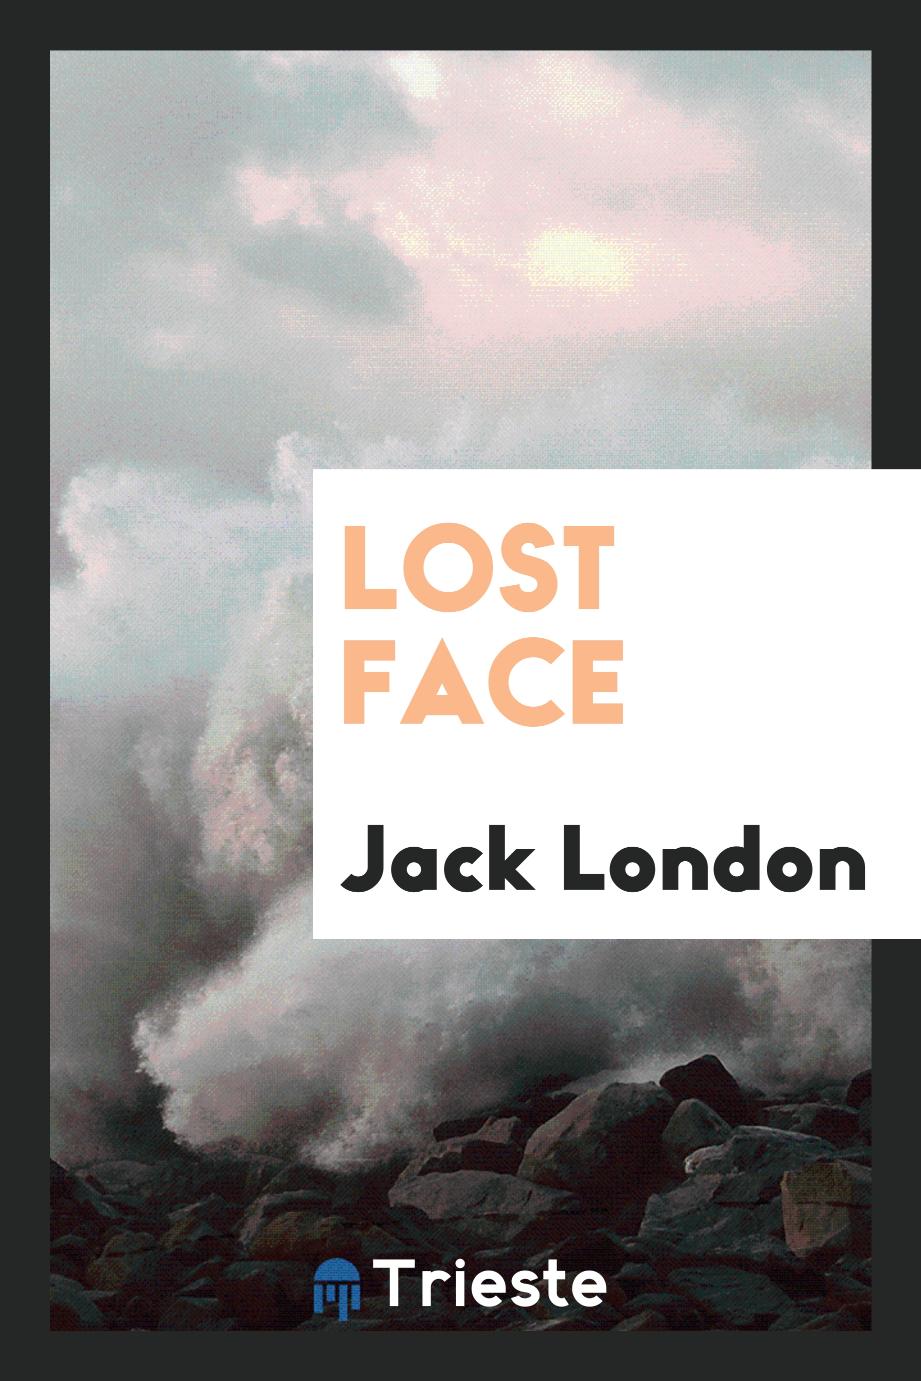 Lost face